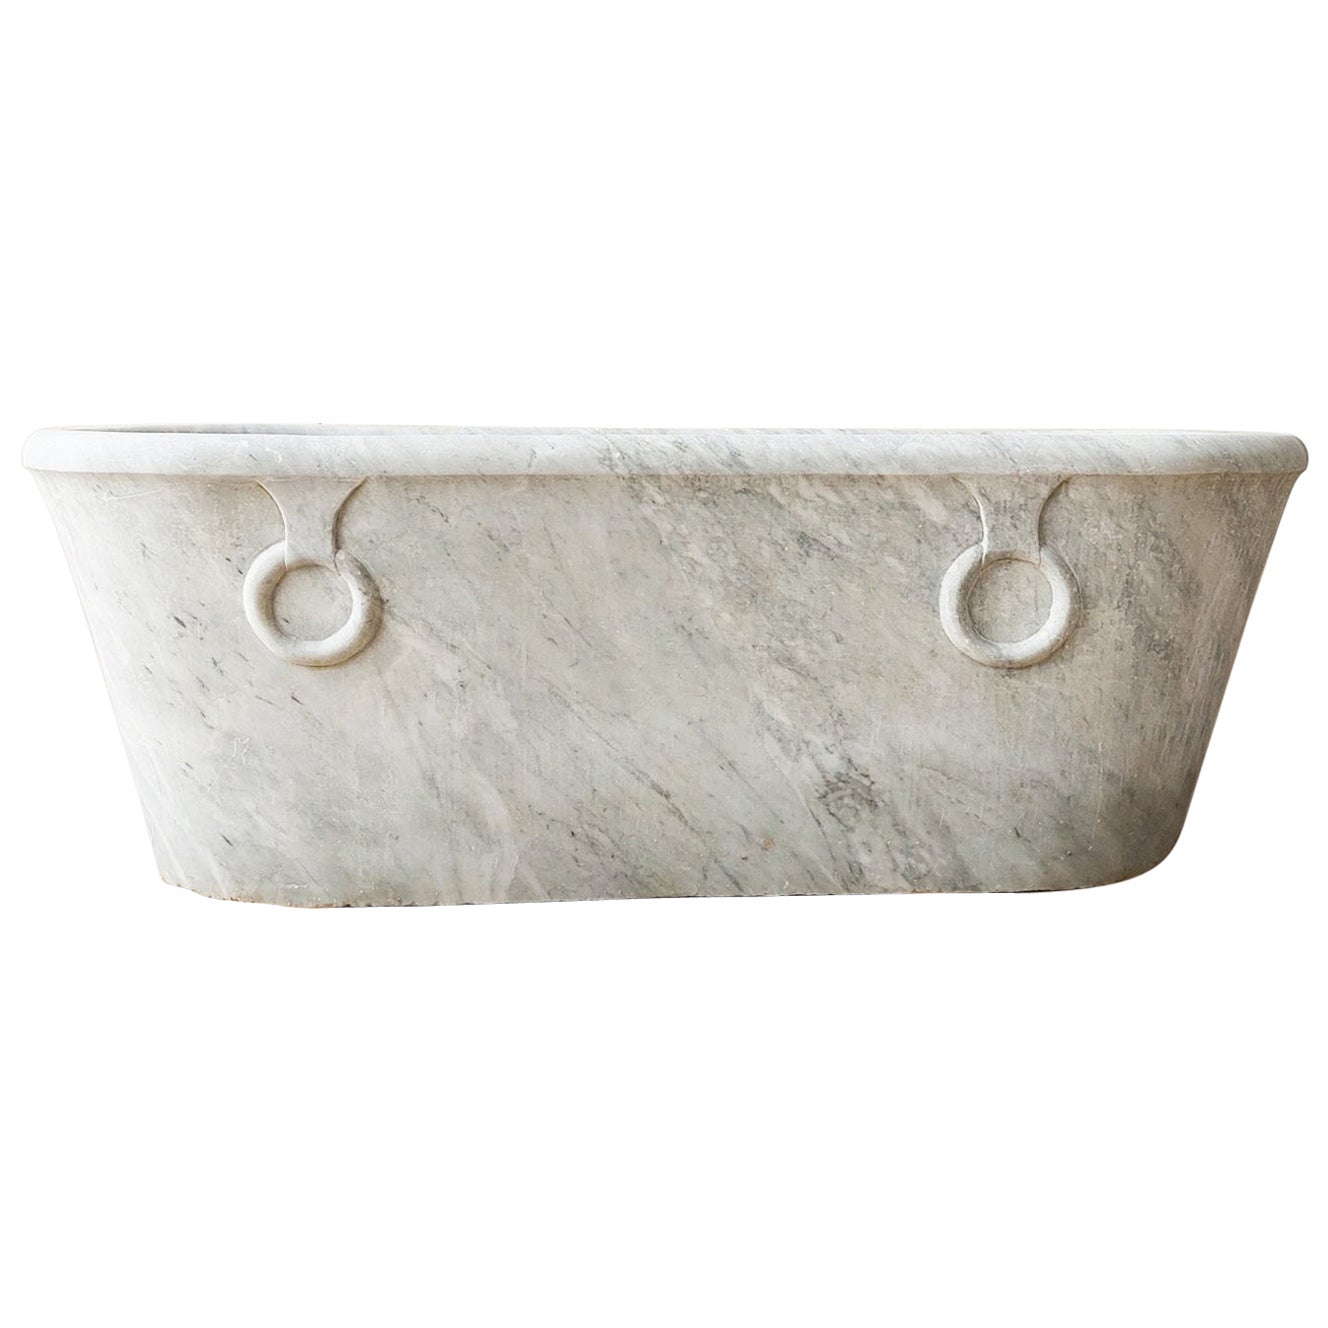 Antique Carrara Marble Bathtub from the Early 19th Century For Sale